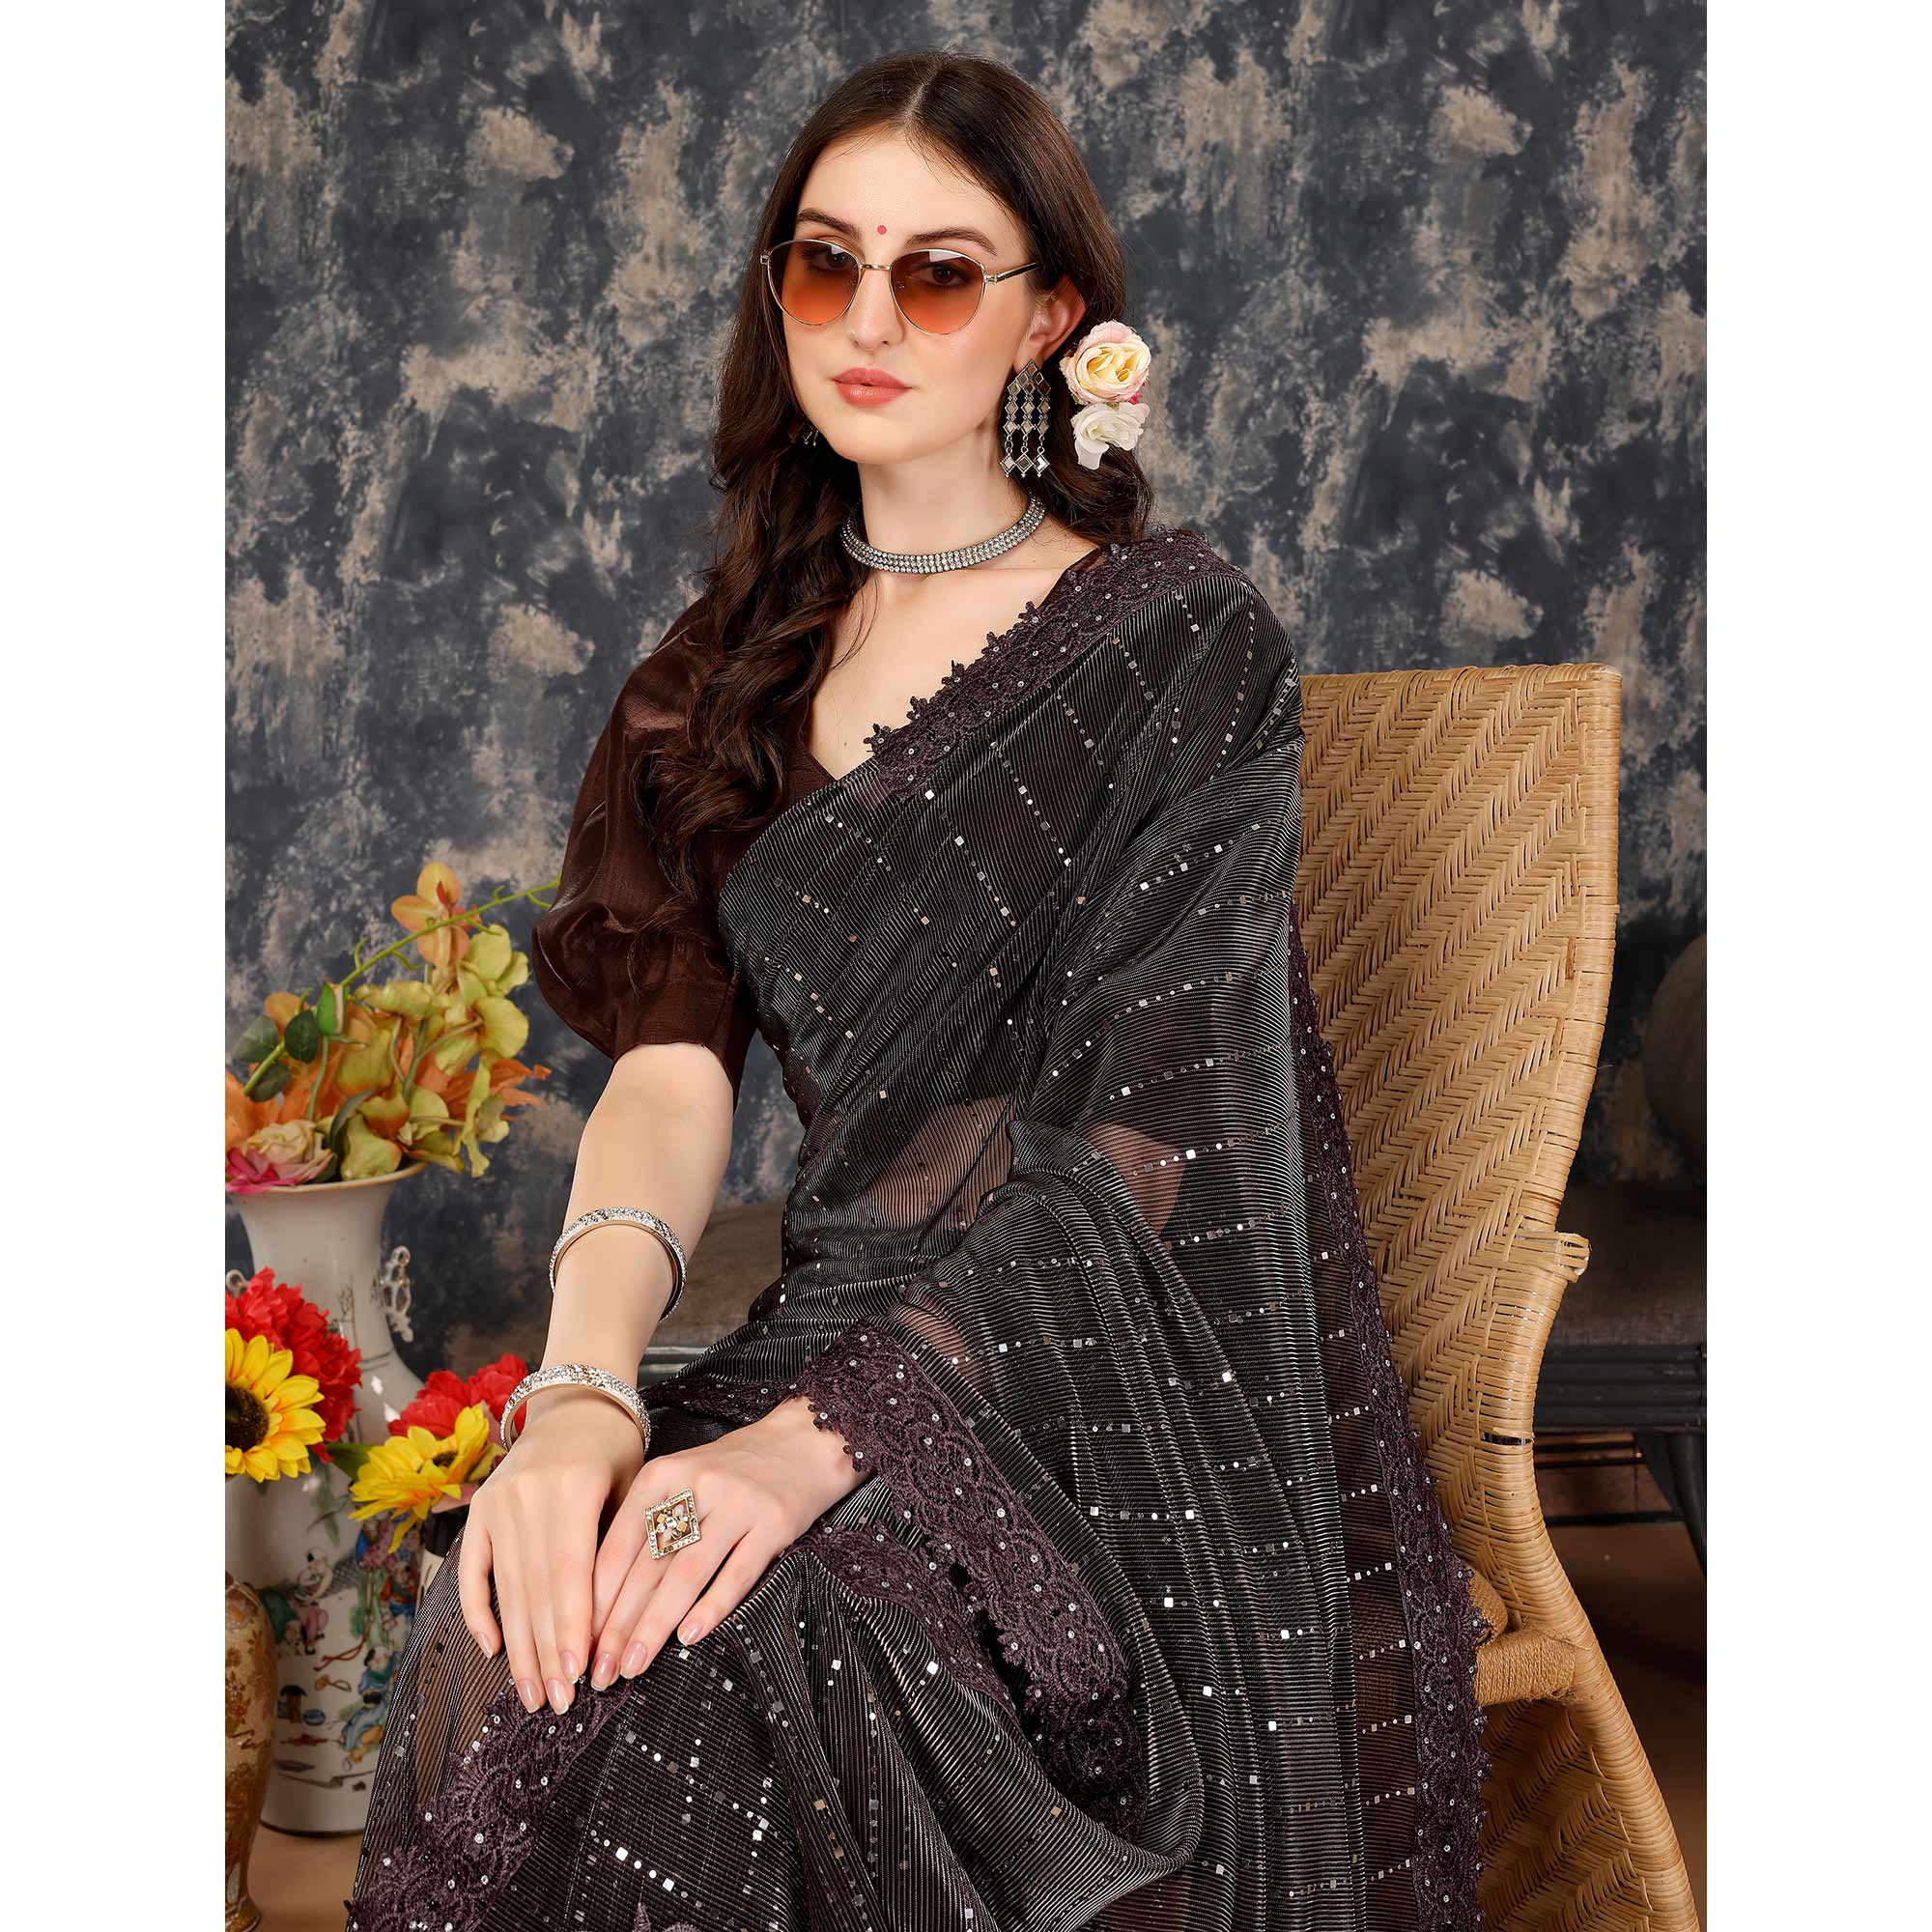 Brown Tikali Work Lycra Saree With Embroidered Lace Border